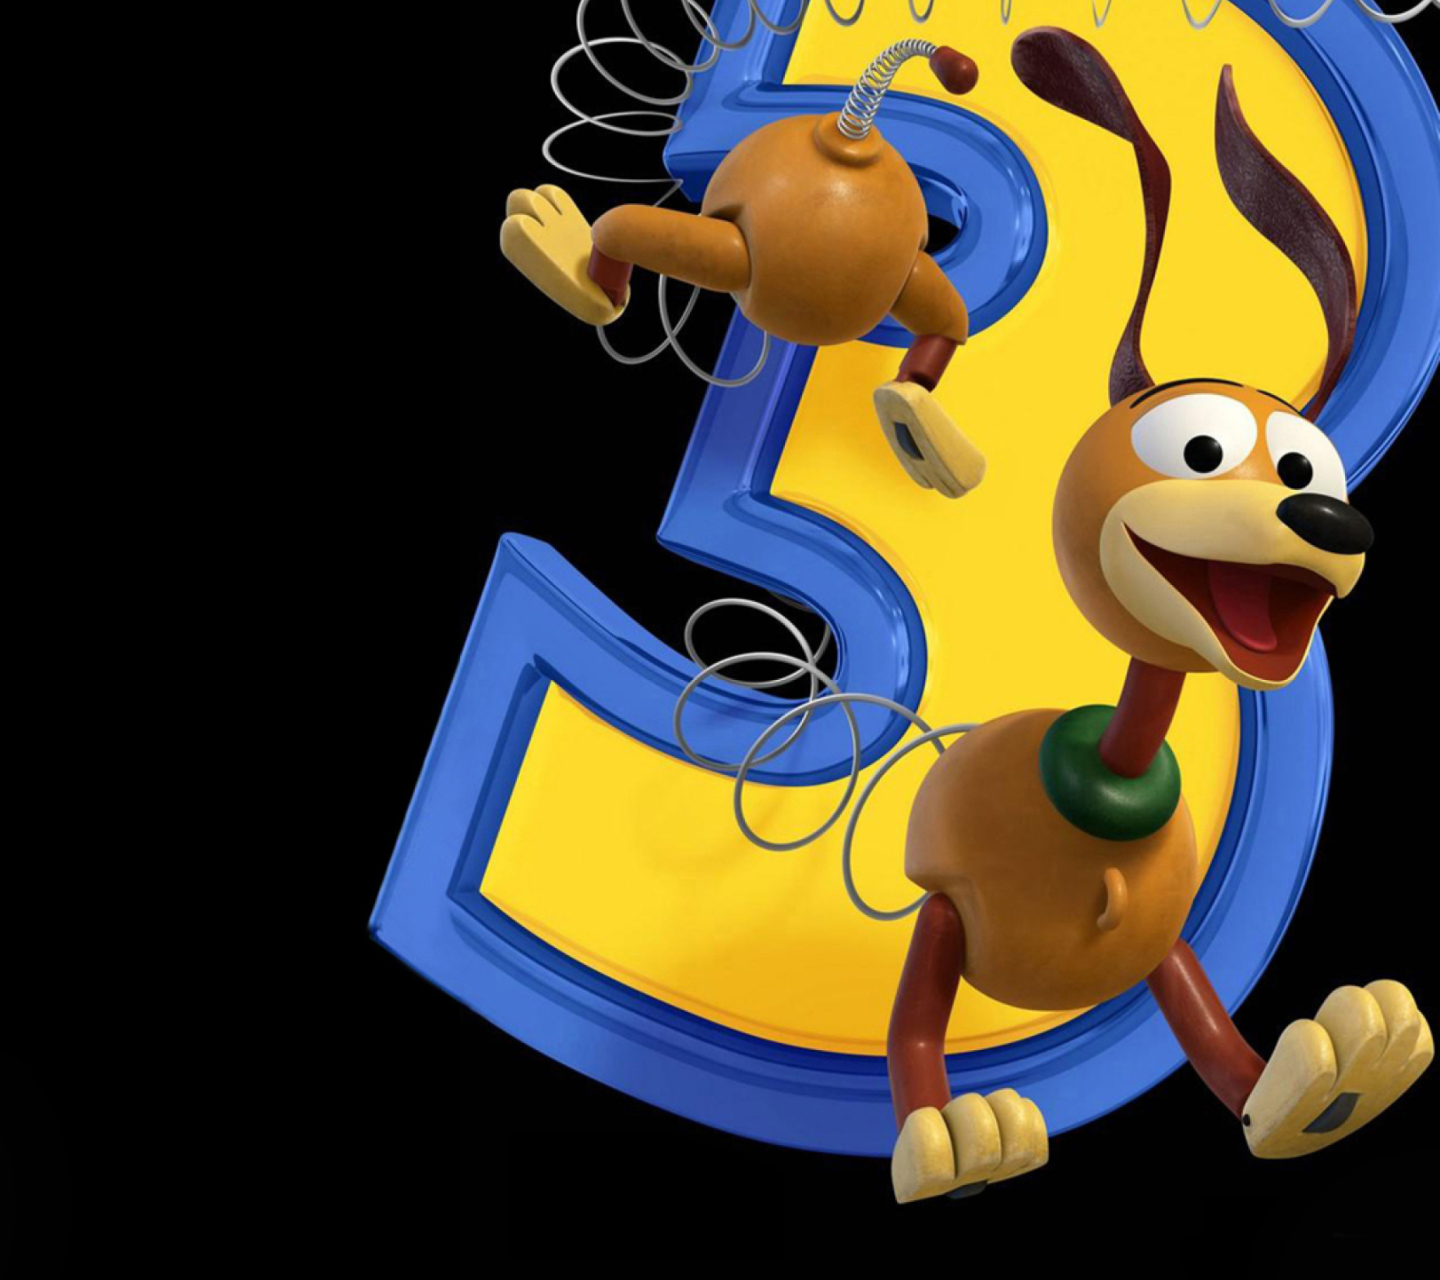 Dog From Toy Story 3 wallpaper 1440x1280